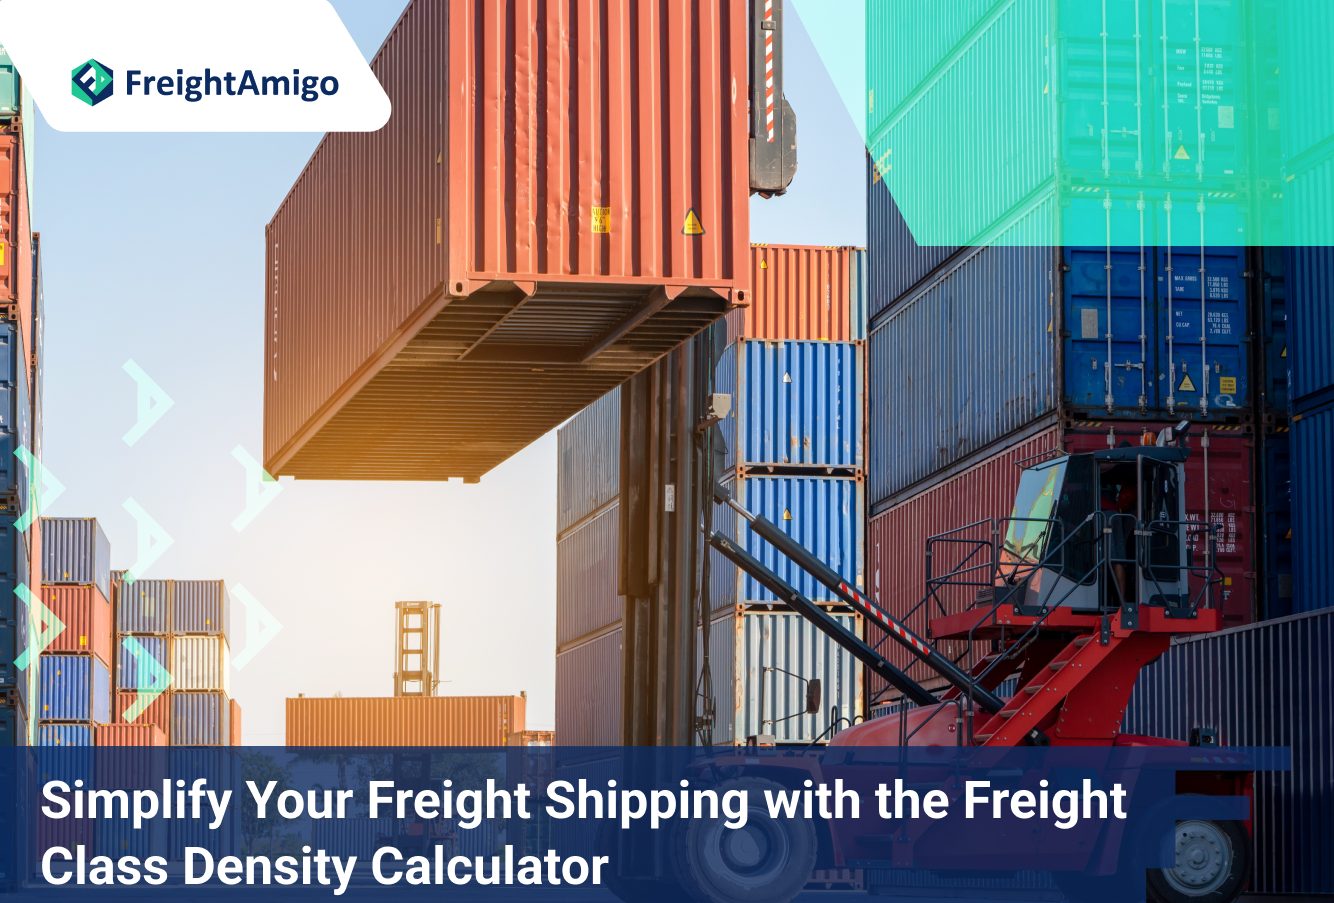 Simplify Your Freight Shipping with the Freight Class Density Calculator